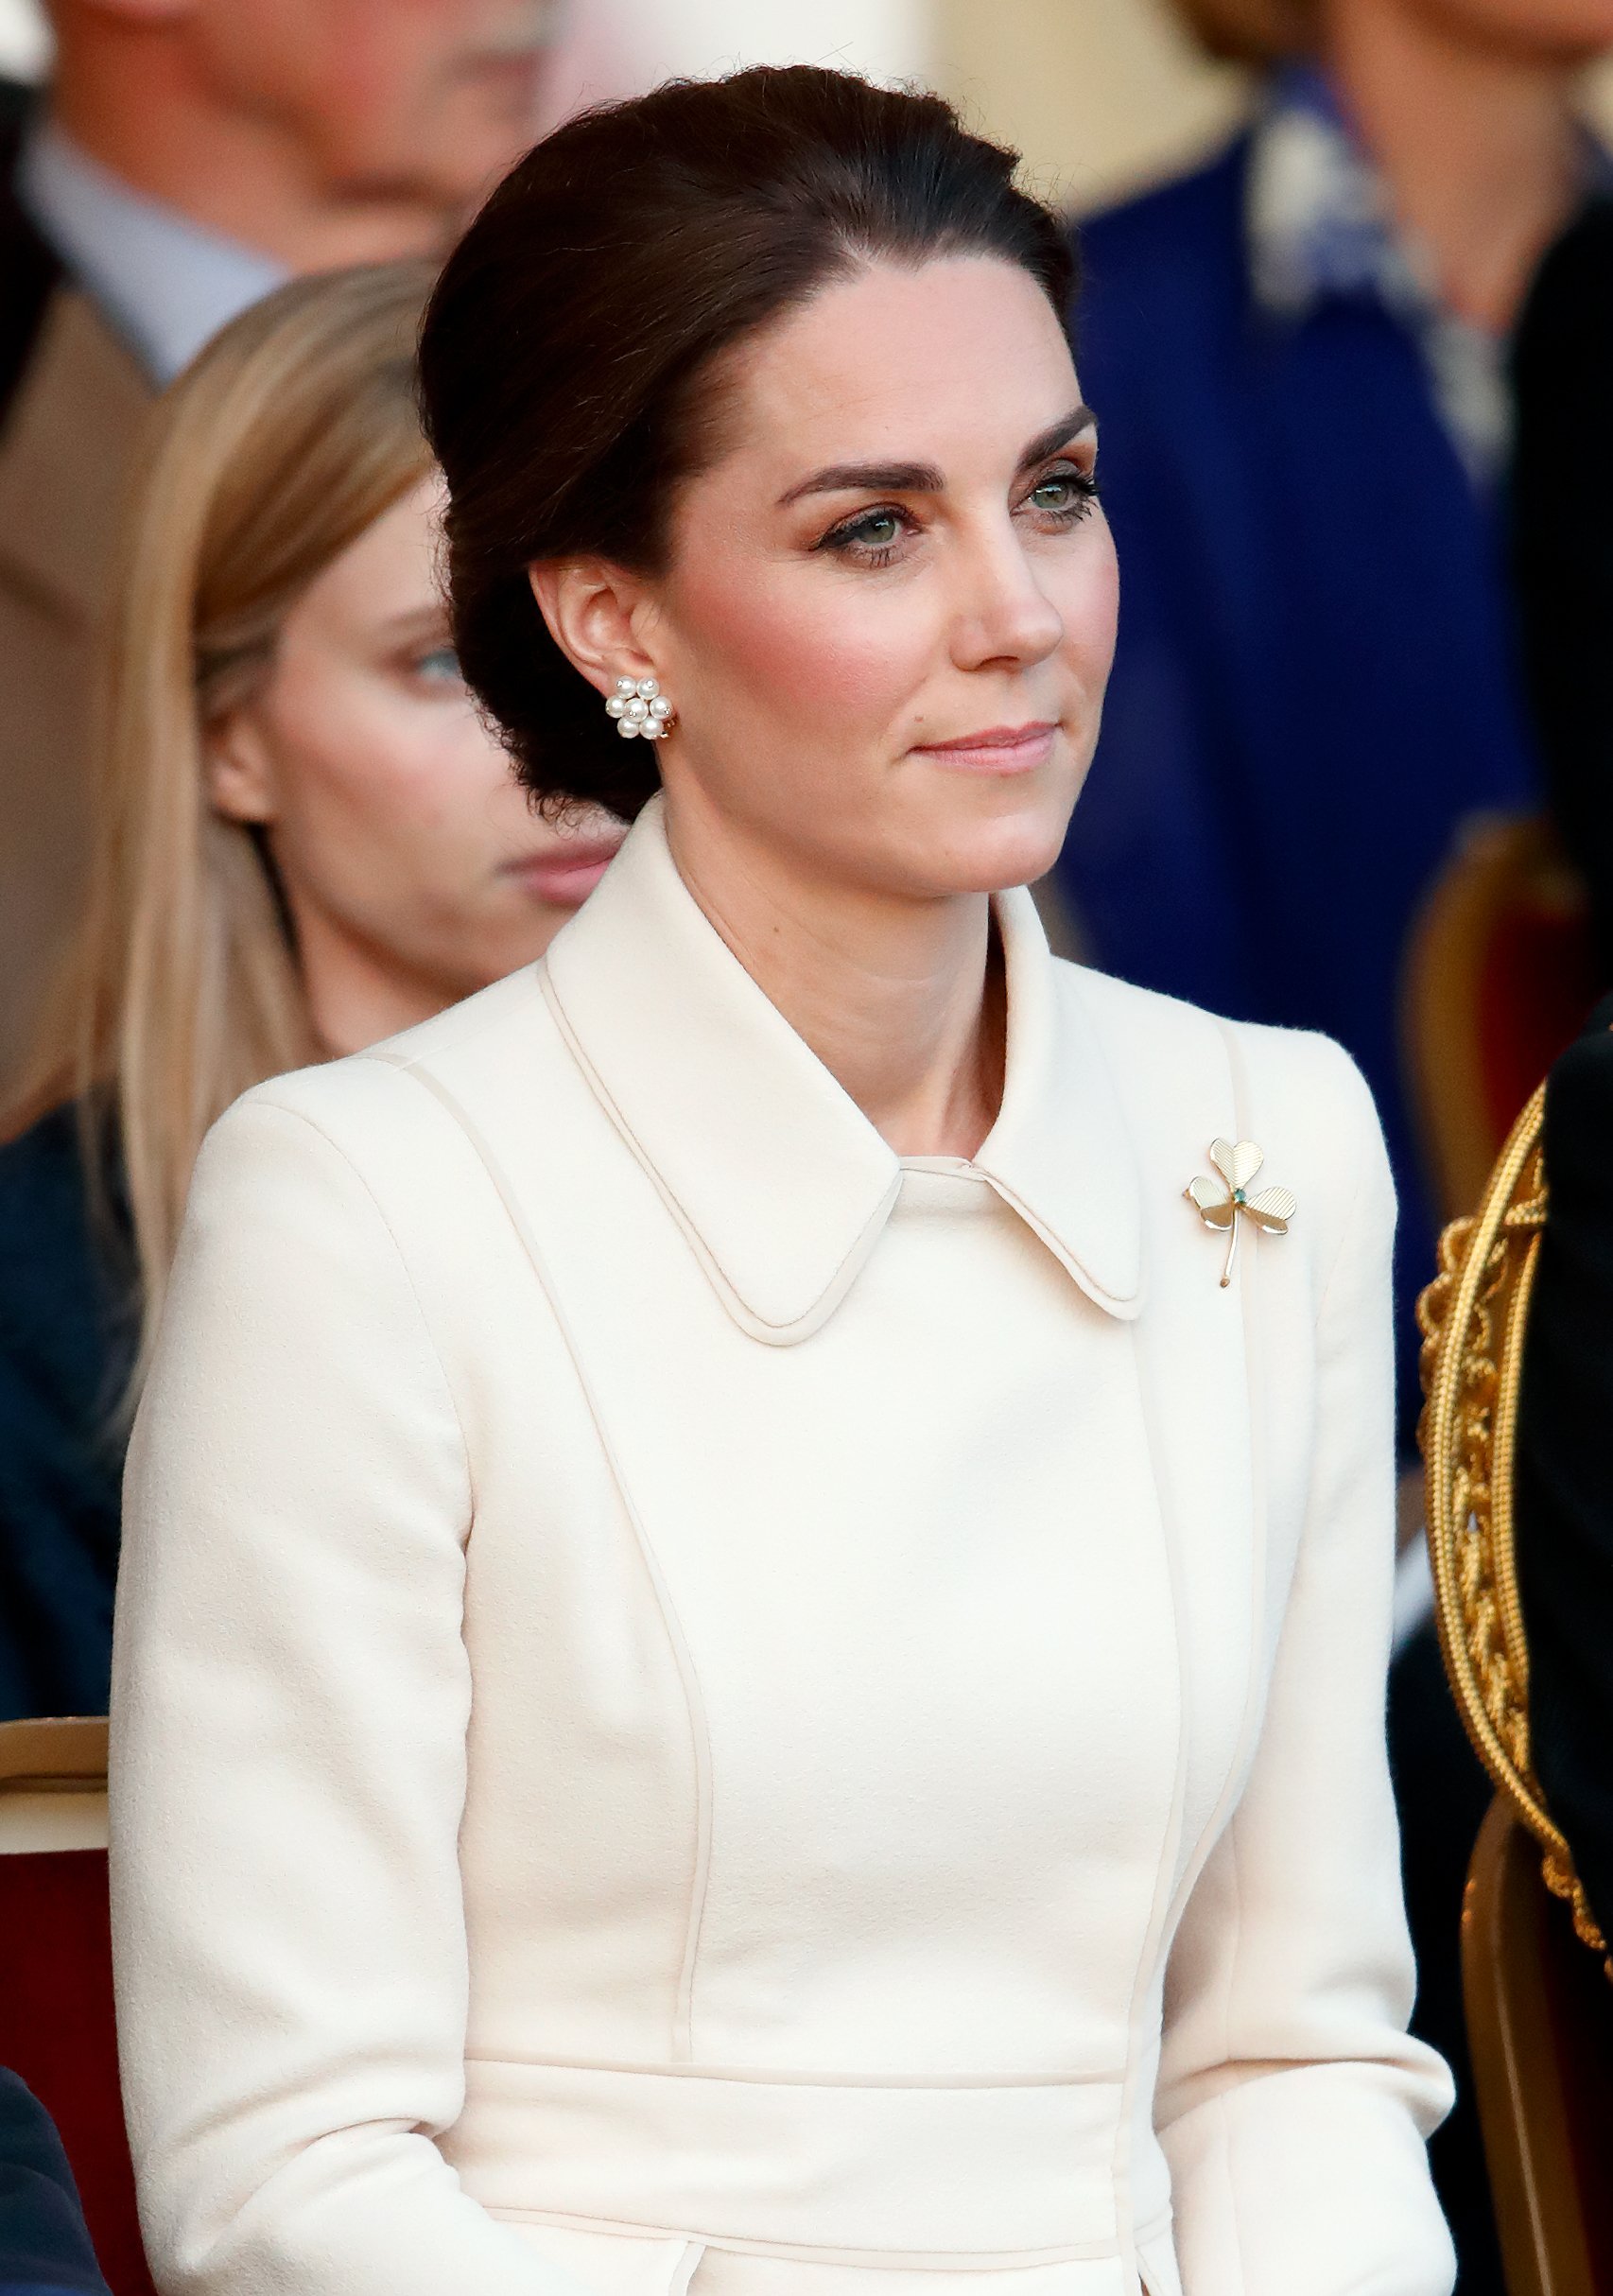 Catherine, Duchess of Cambridge attends the Household Division's 'Beating Retreat' at Horse Guards Parade on June 6, 2019 in London, England. | Photo: GettyImages